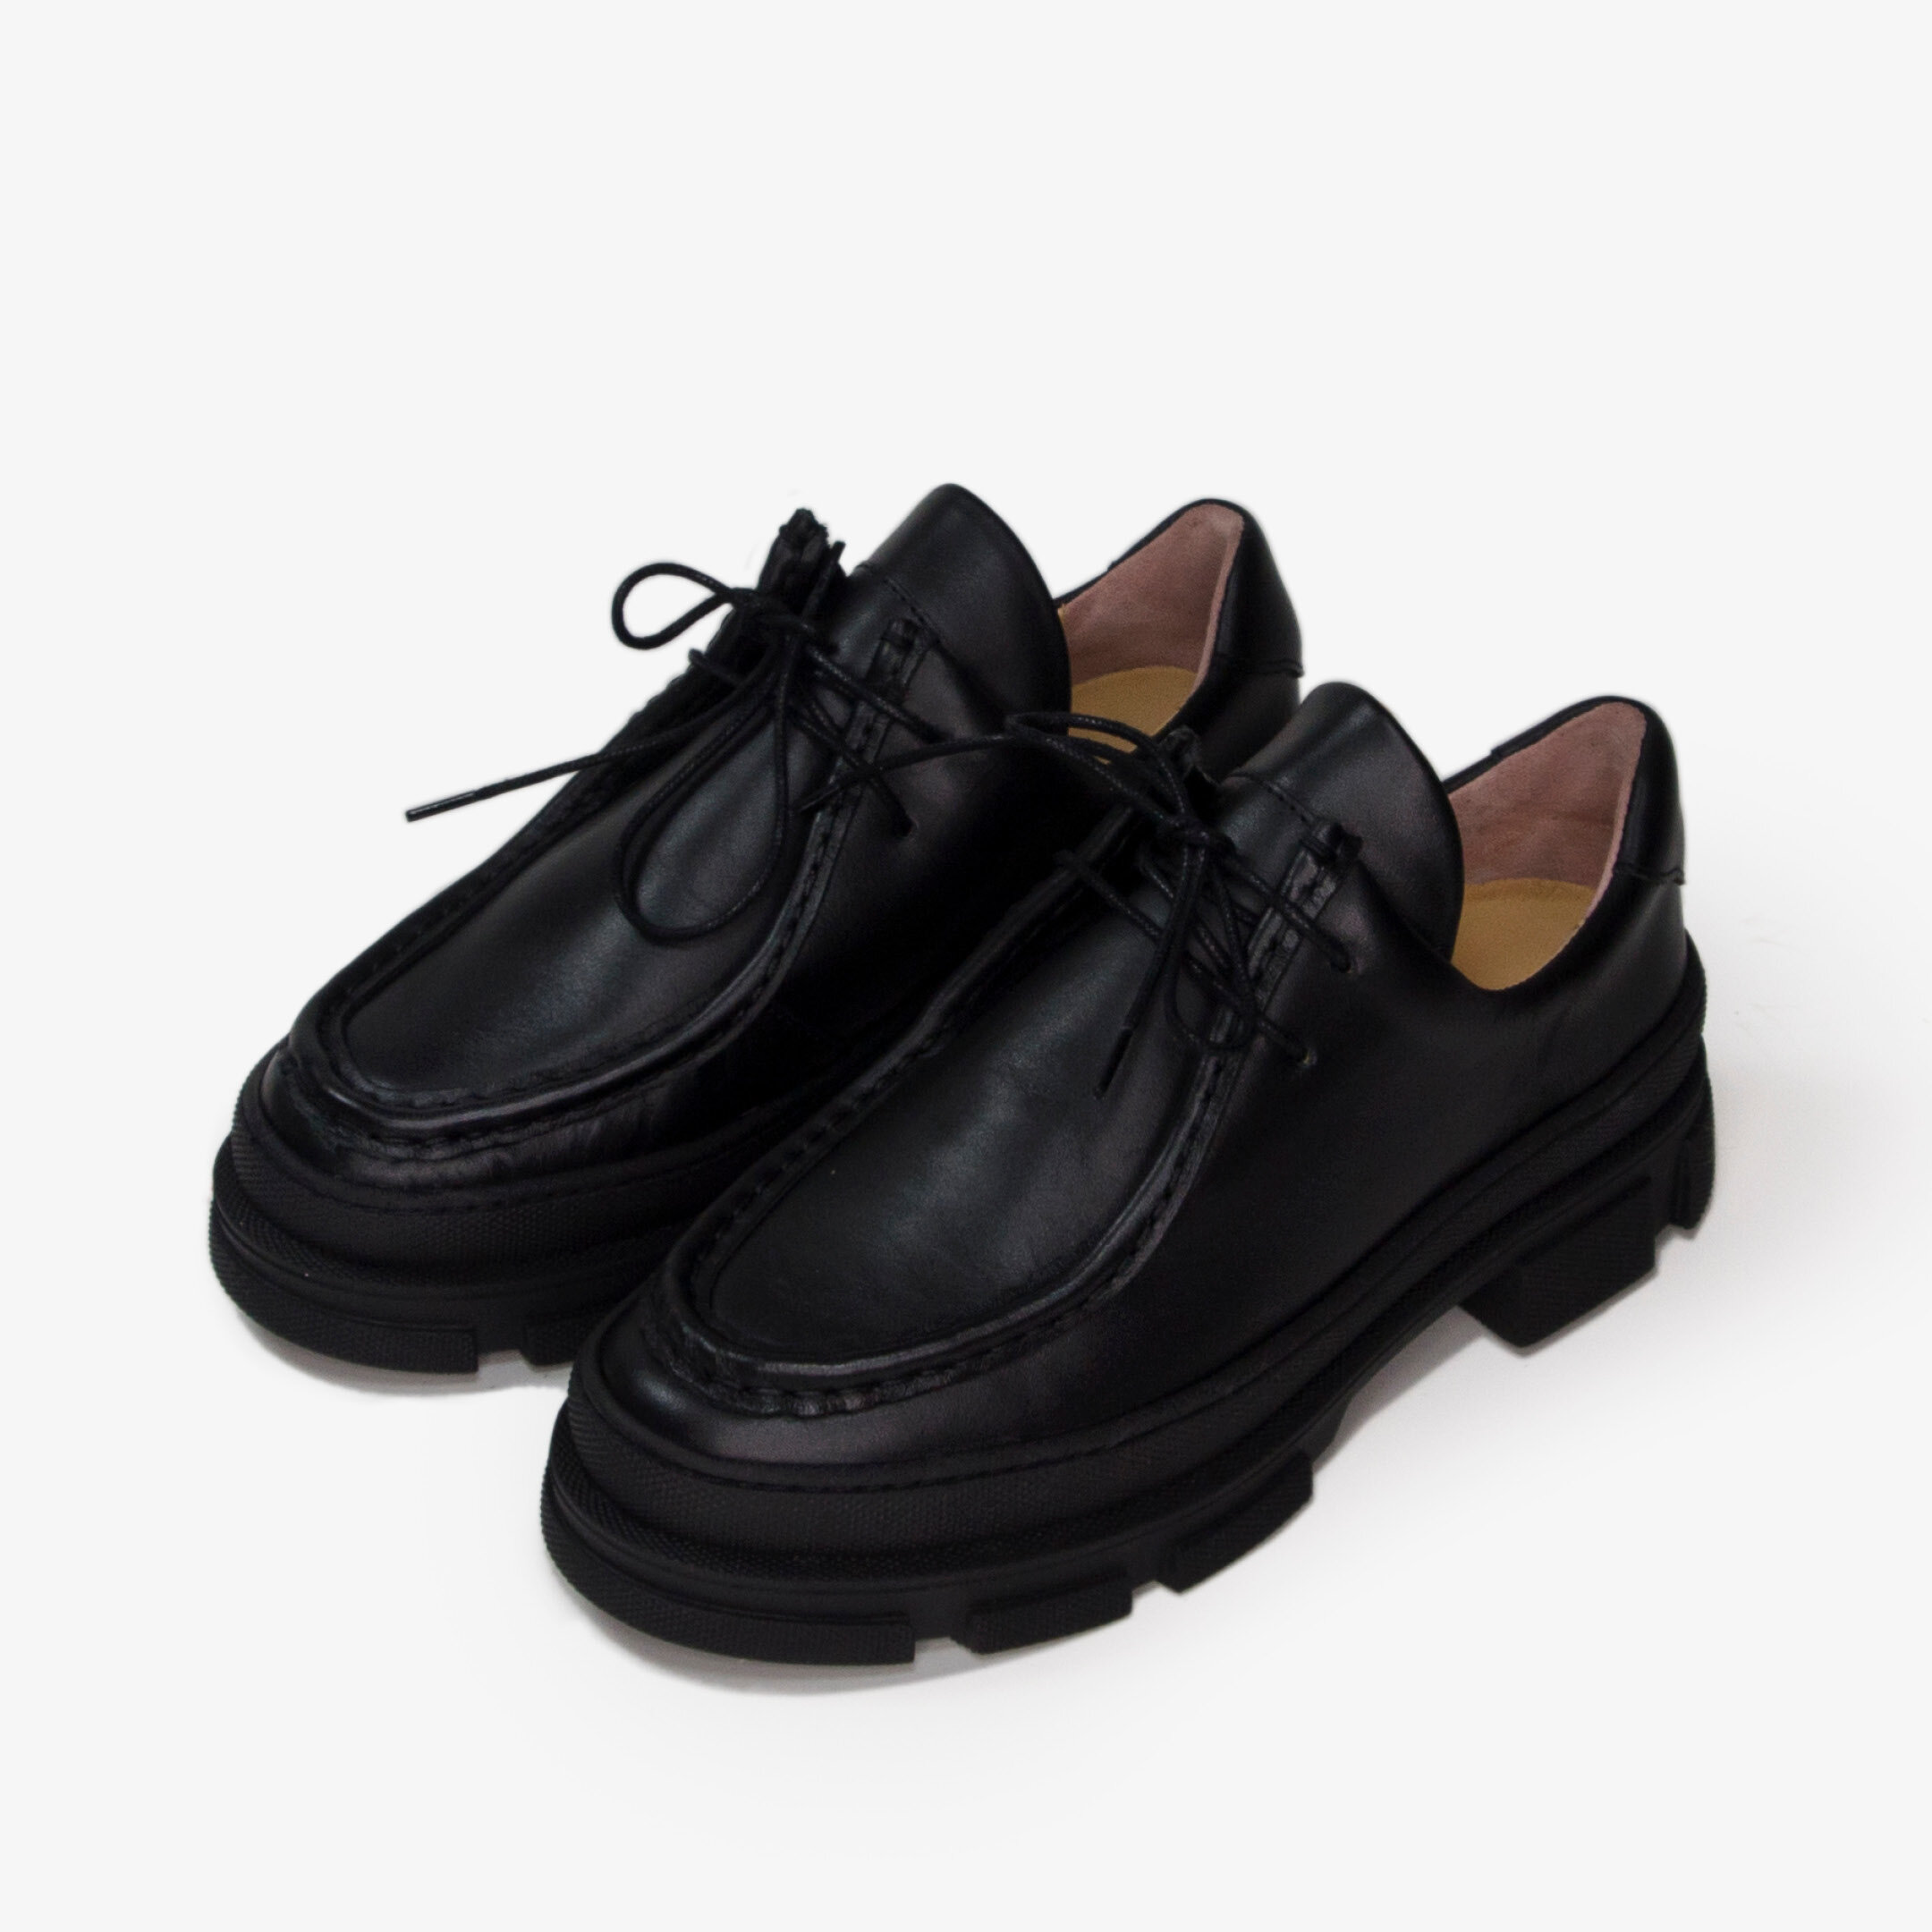 an hour and a shower — Loafer Squash Black